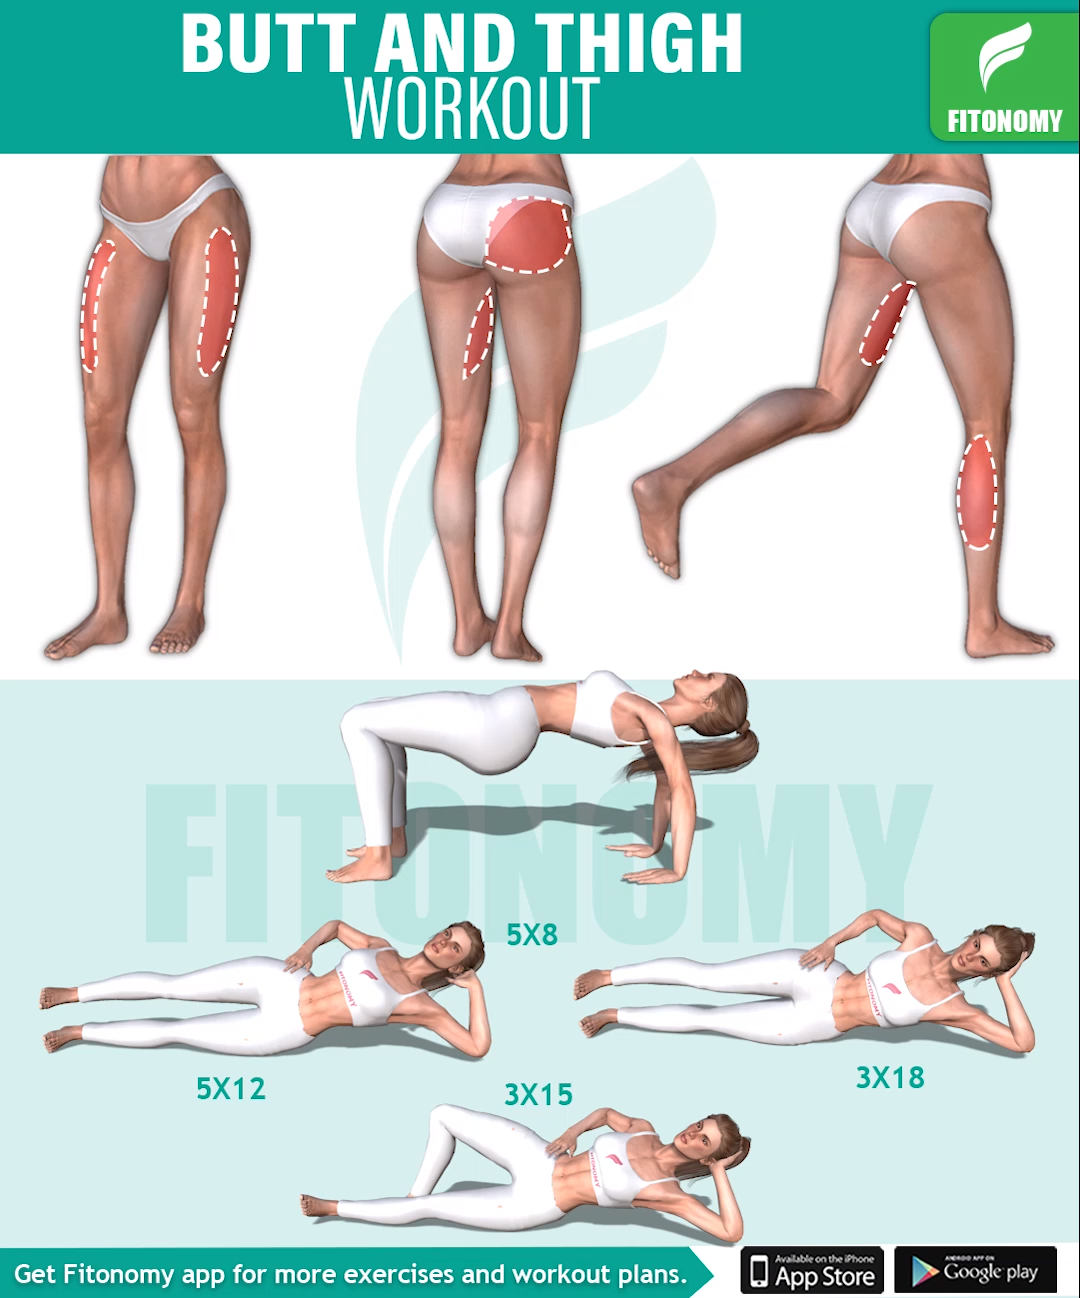 Butt and thigh workout -   15 health and fitness Training ideas